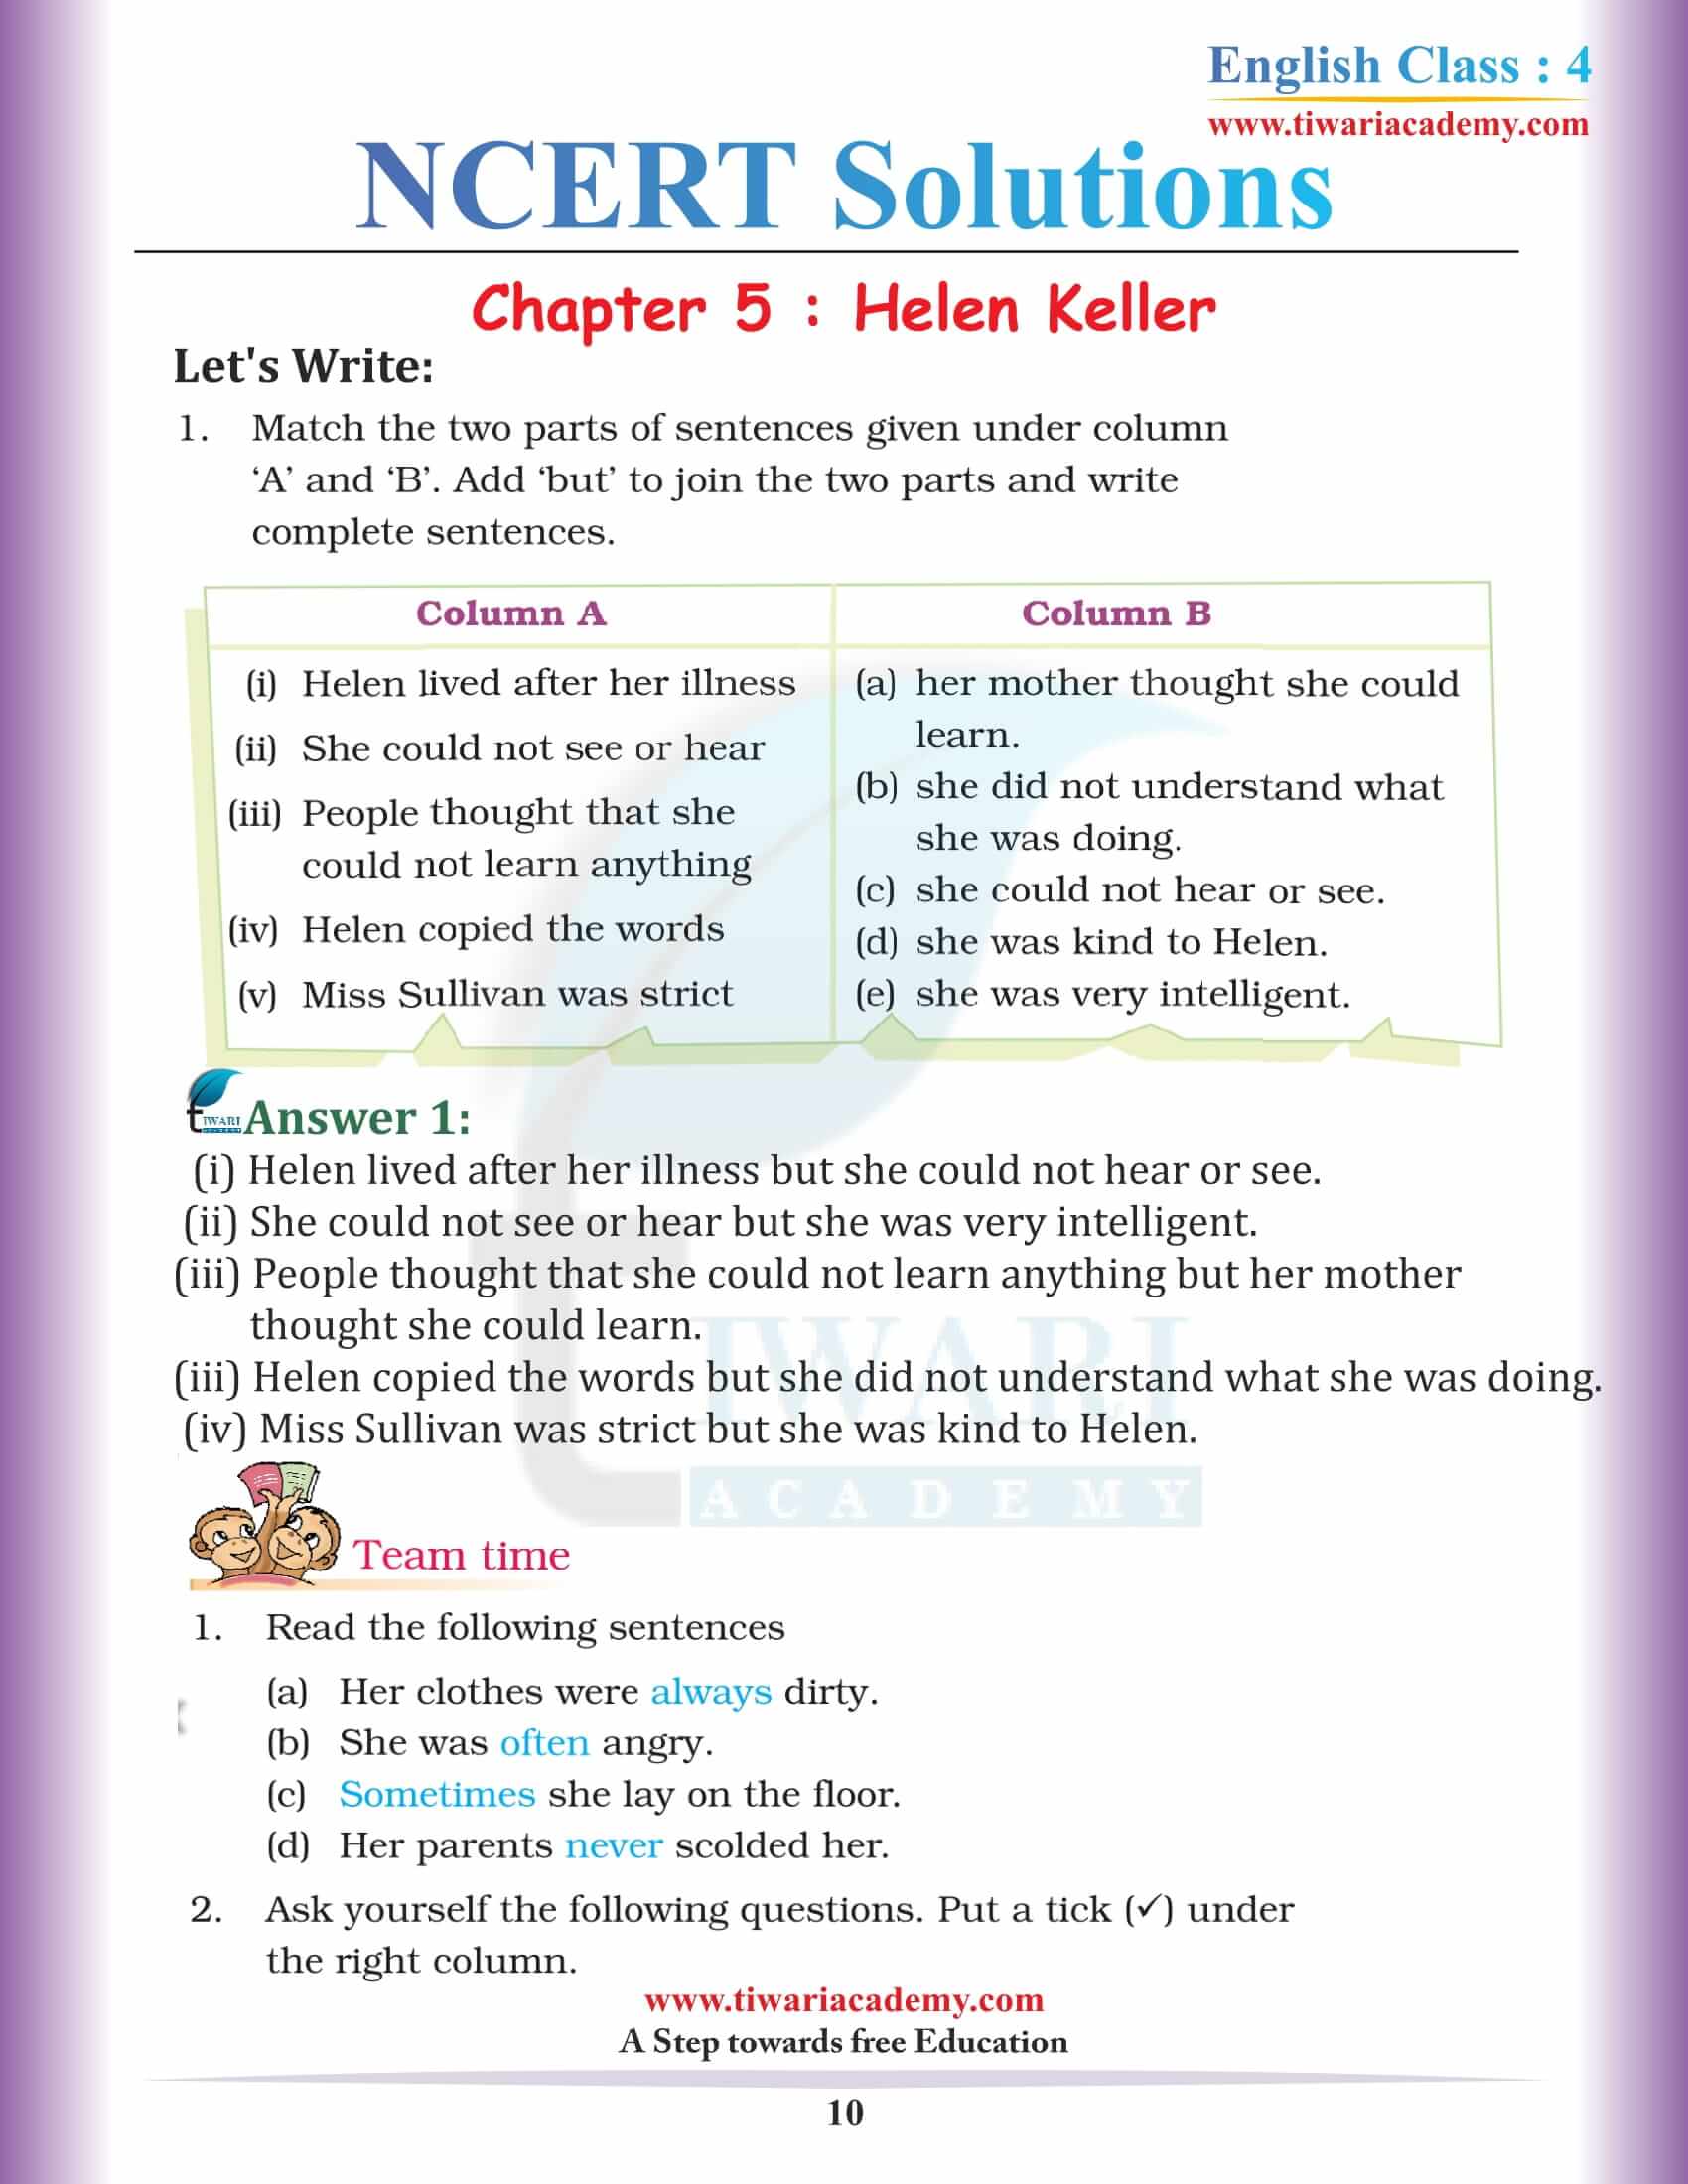 Solutions for Class 4 English Unit 5 NCERT